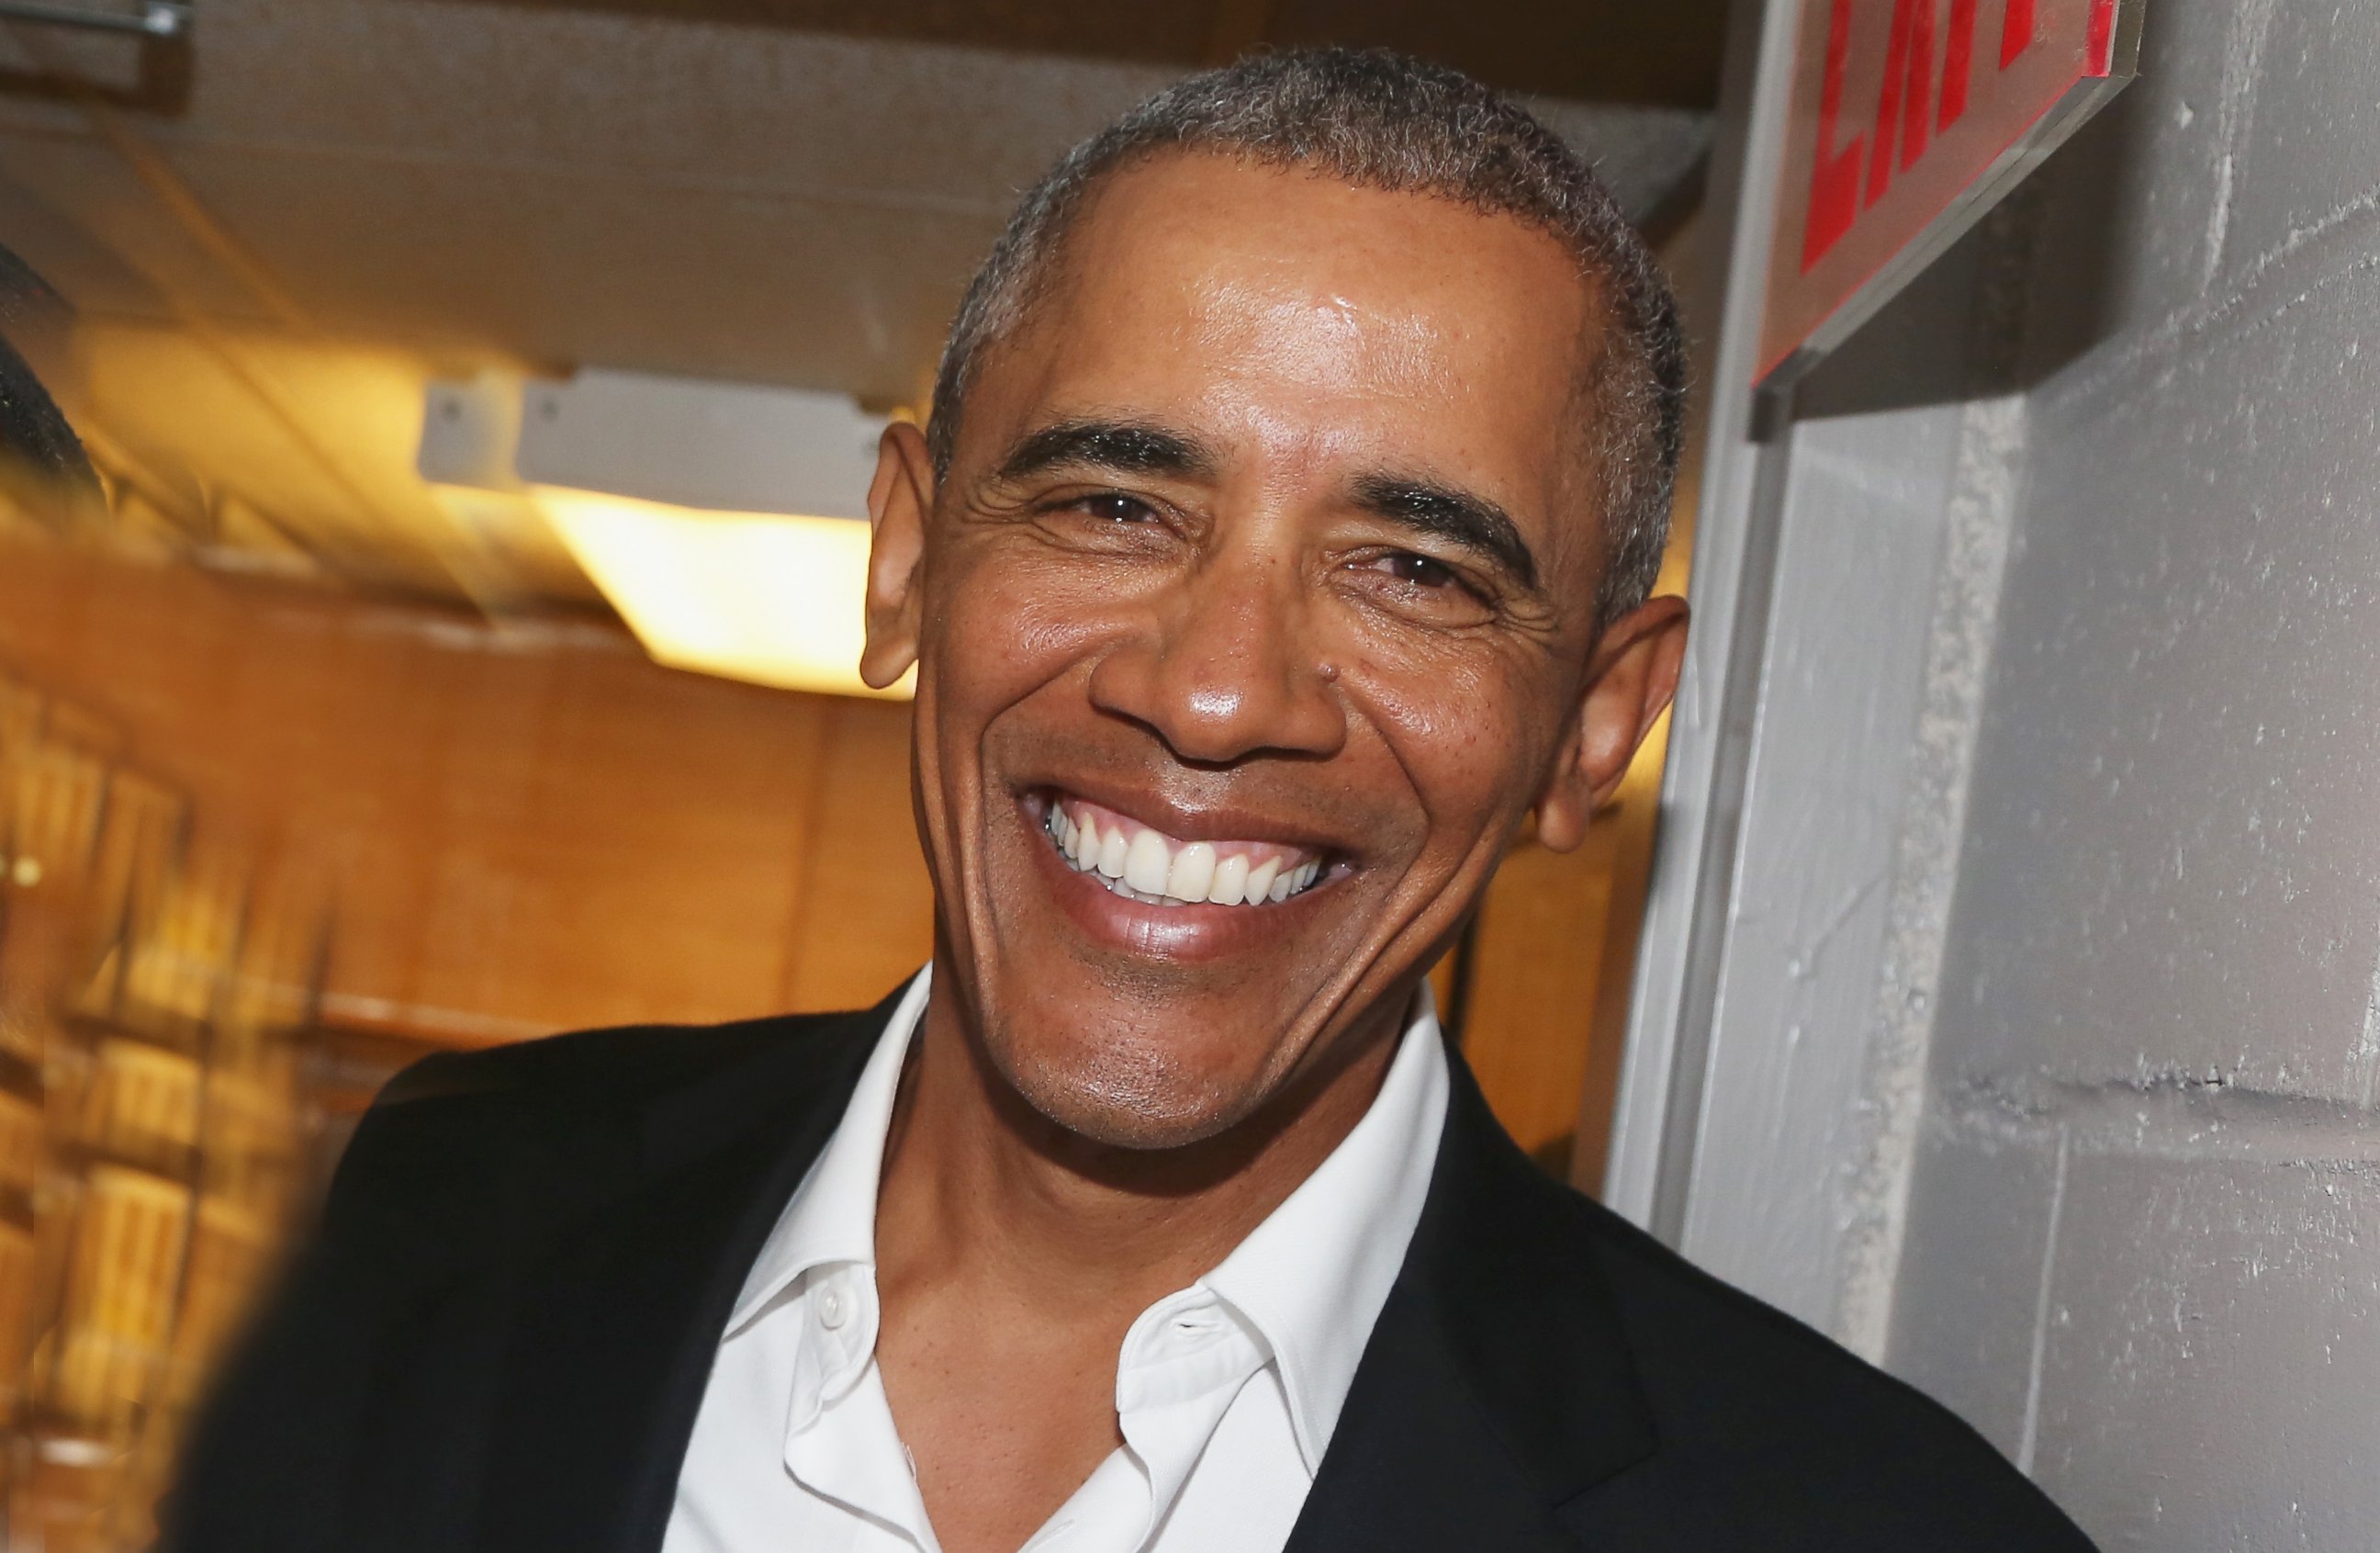 PHOTO: The 44th President of The United States Barak Obama, poses backstage at The Roundabout Theatre Company's production of "Arthur Miller's The Price" on Broadway at The American Airlines Theatre on February 24, 2017 in New York City.  